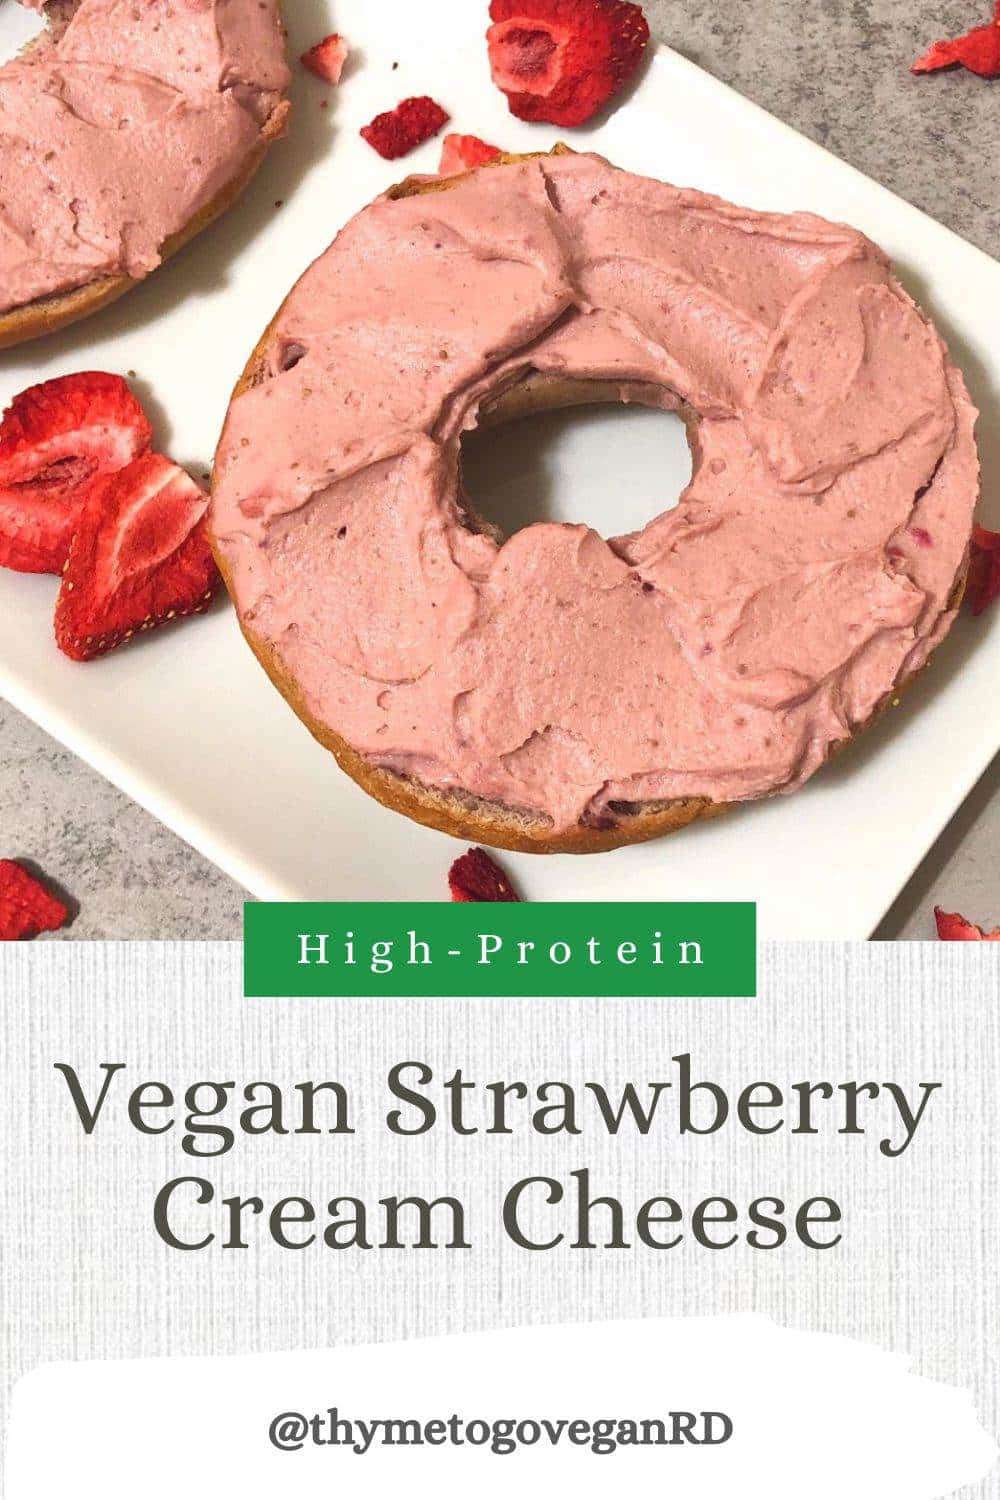 Photo of vegan strawberry cream cheese spread on a bagel on a white plate with freeze-dried strawberries sprinkled around it. Text overlay reads "High protein vegan strawberry cream cheese"